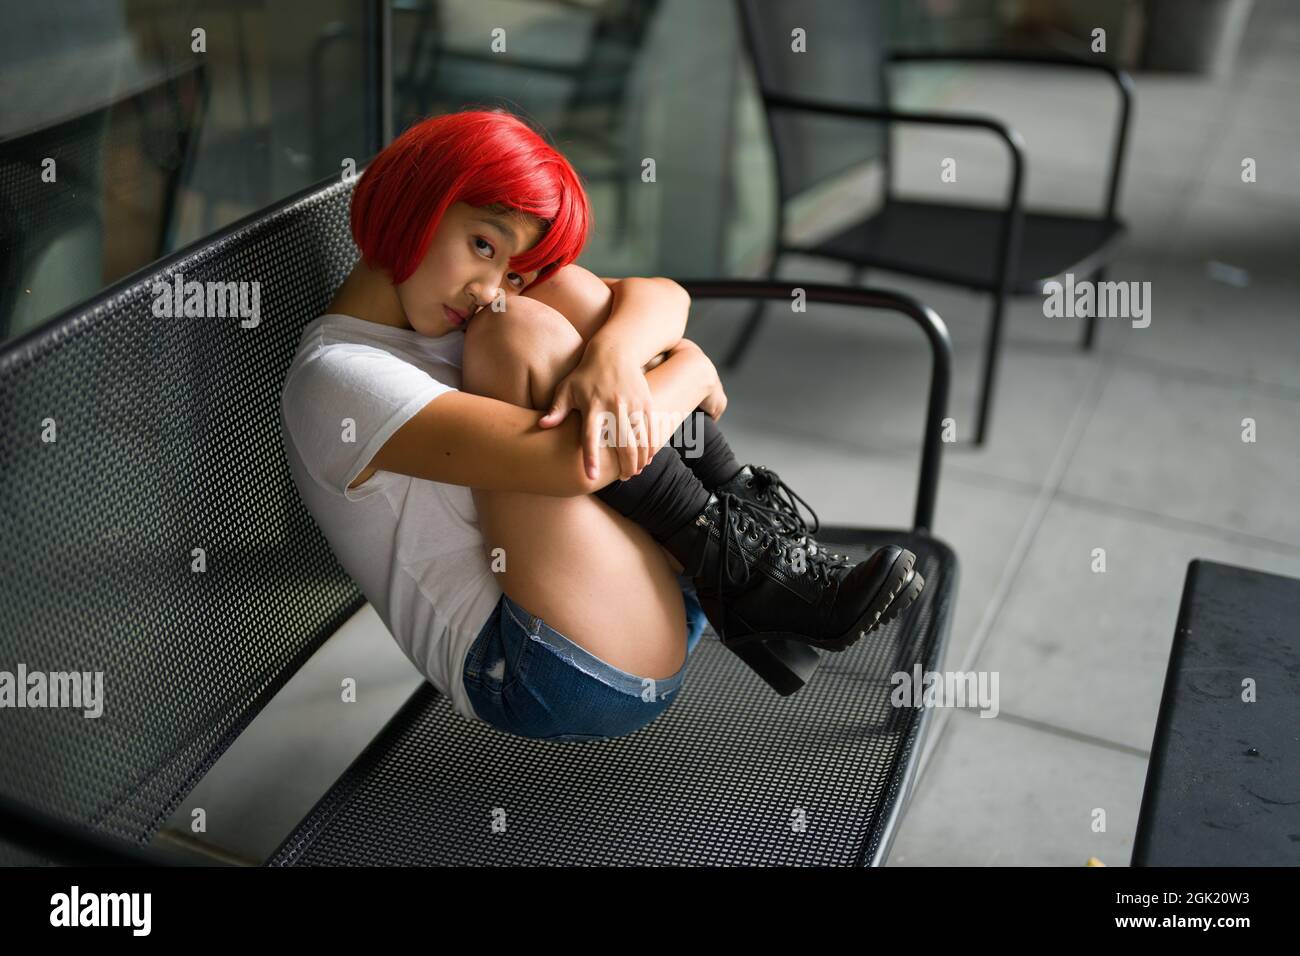 Cosplay Actress in Fetal Position on Bench | Red Blood Cell Cosplay Stock Photo